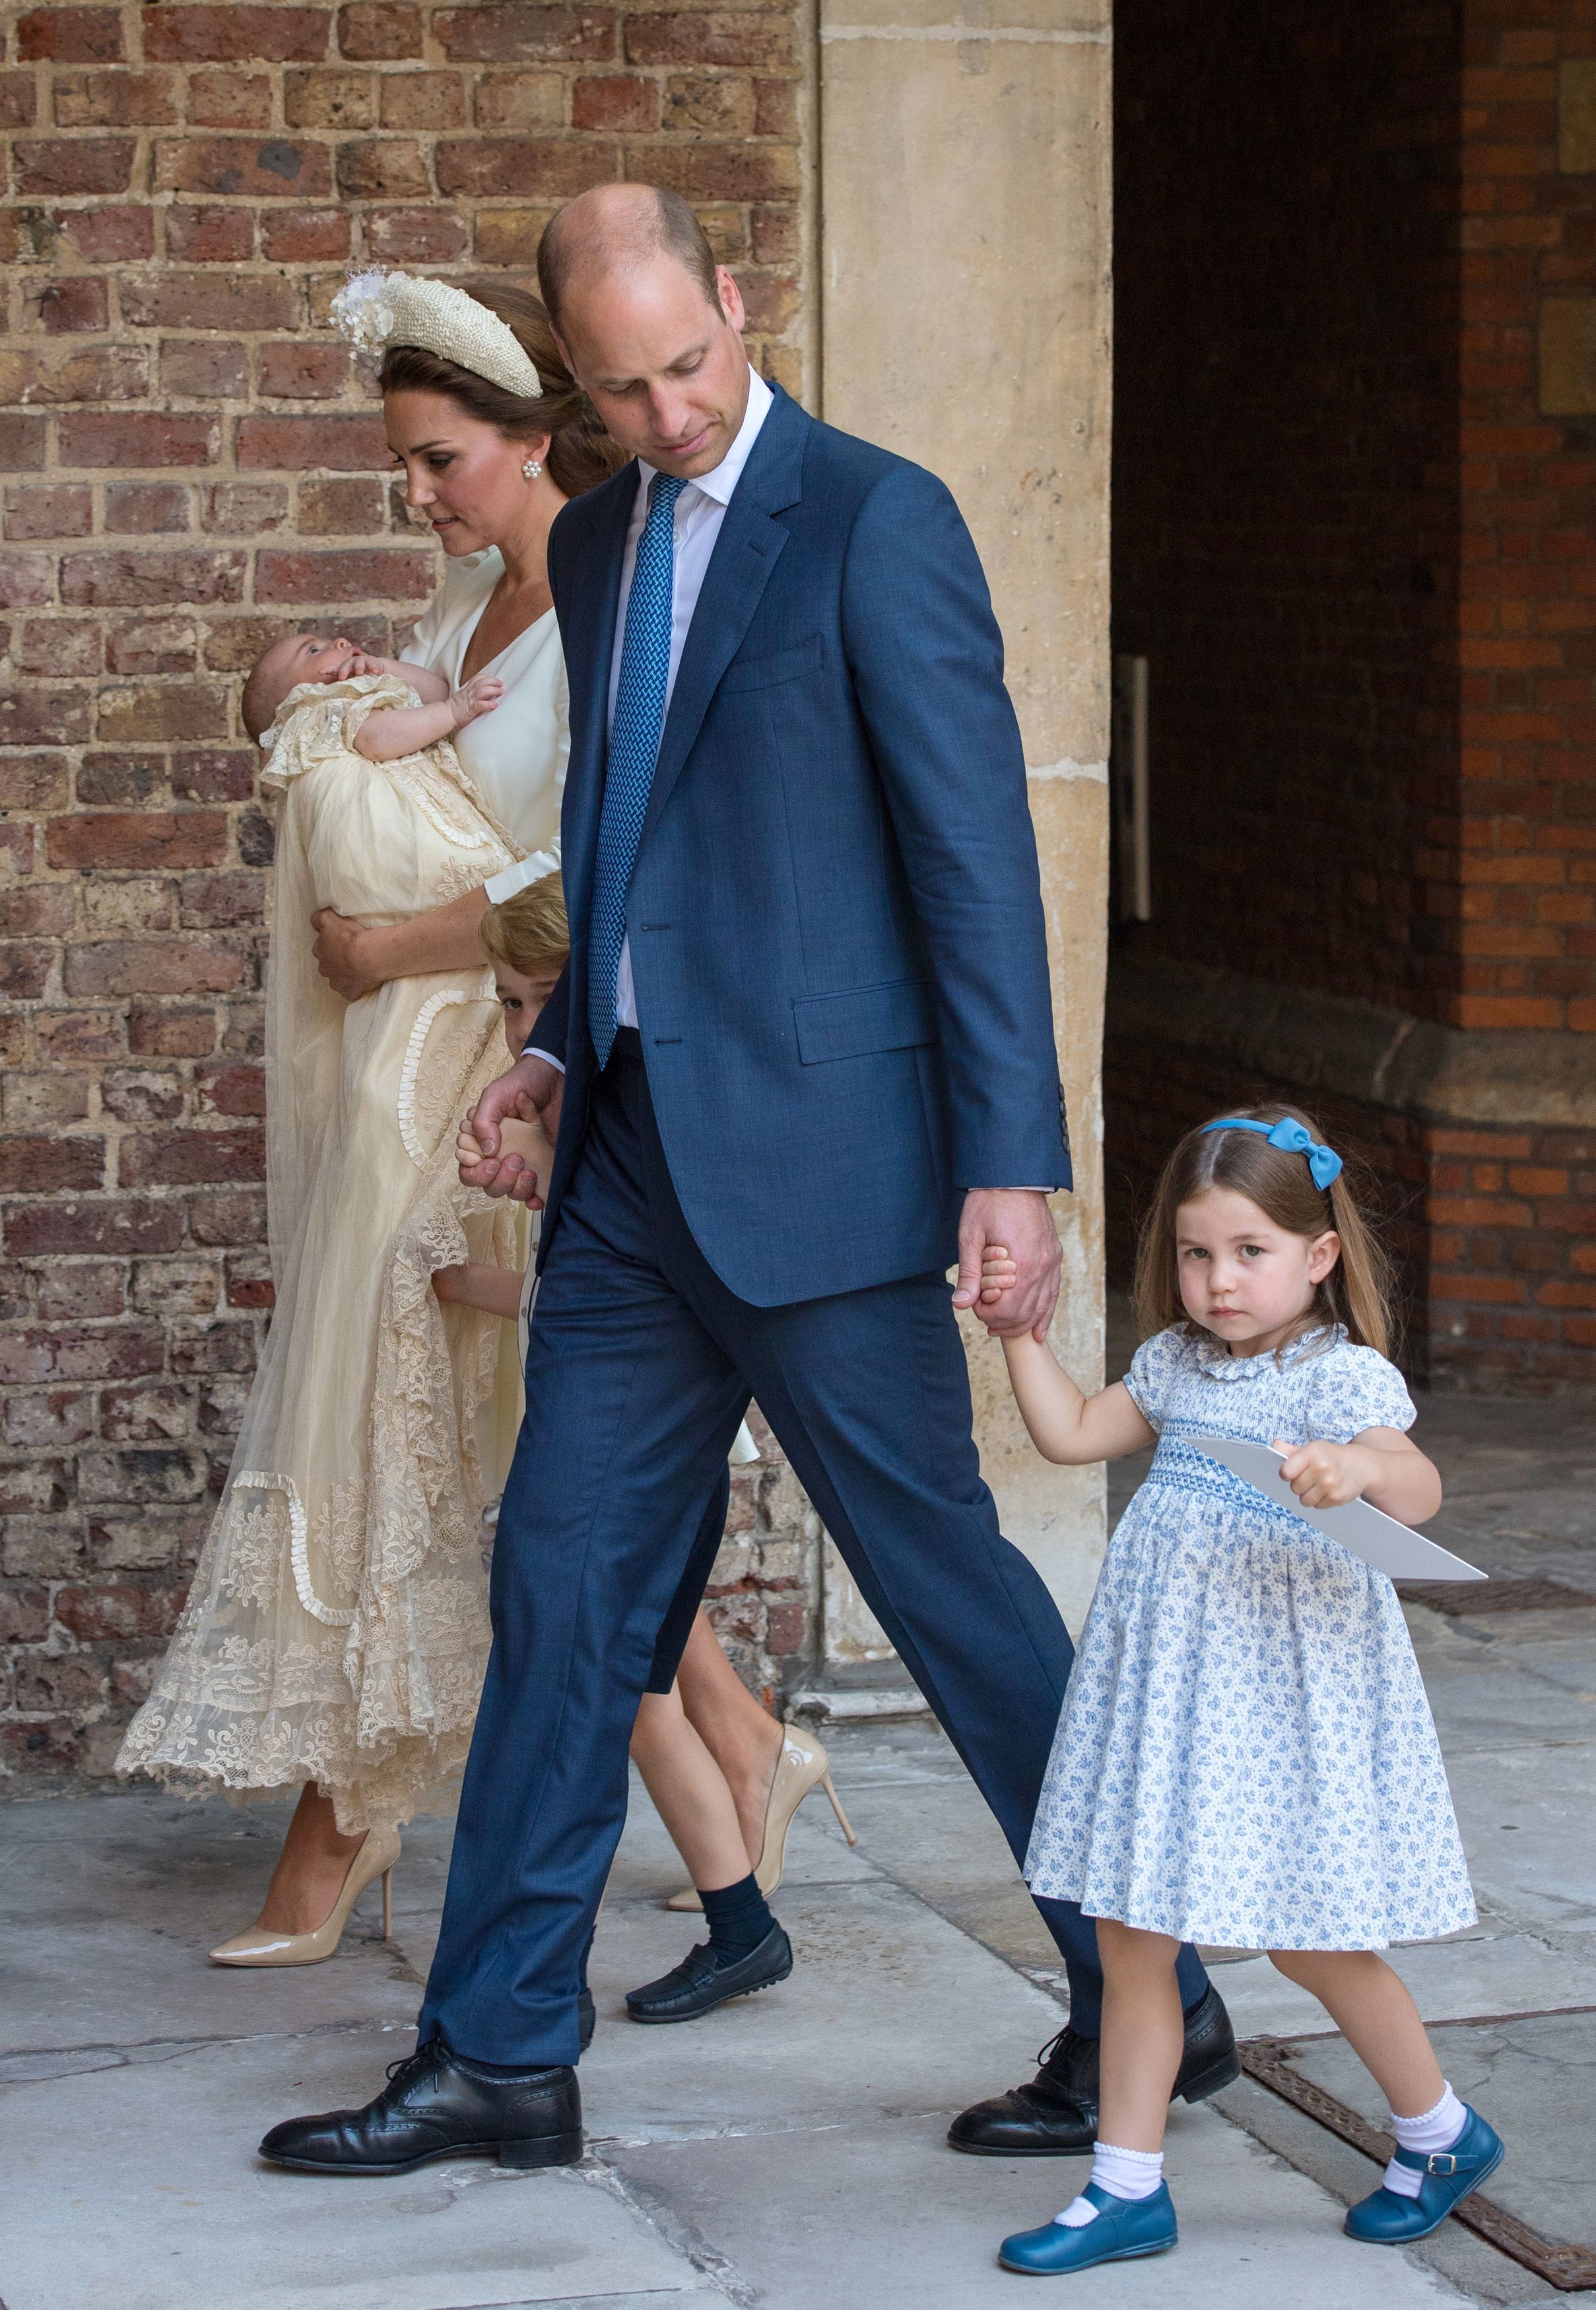 <p><a href="https://www.wonderwall.com/celebrity/profiles/overview/duchess-kate-1356.article">Duchess Kate</a> carried Prince Louis while Princess Charlotte held dad <a href="https://www.wonderwall.com/celebrity/profiles/overview/prince-william-482.article">Prince William</a>'s hand as they exited the Chapel Royal at St. James's Palace in London on July 9, 2018, following <a href="https://www.wonderwall.com/celebrity/photos/prince-louis-christening-all-best-photos-prince-william-duchess-kate-george-charlotte-prince-harry-meghan-royal-family-3015256.gallery">Louis' christening</a>.</p>